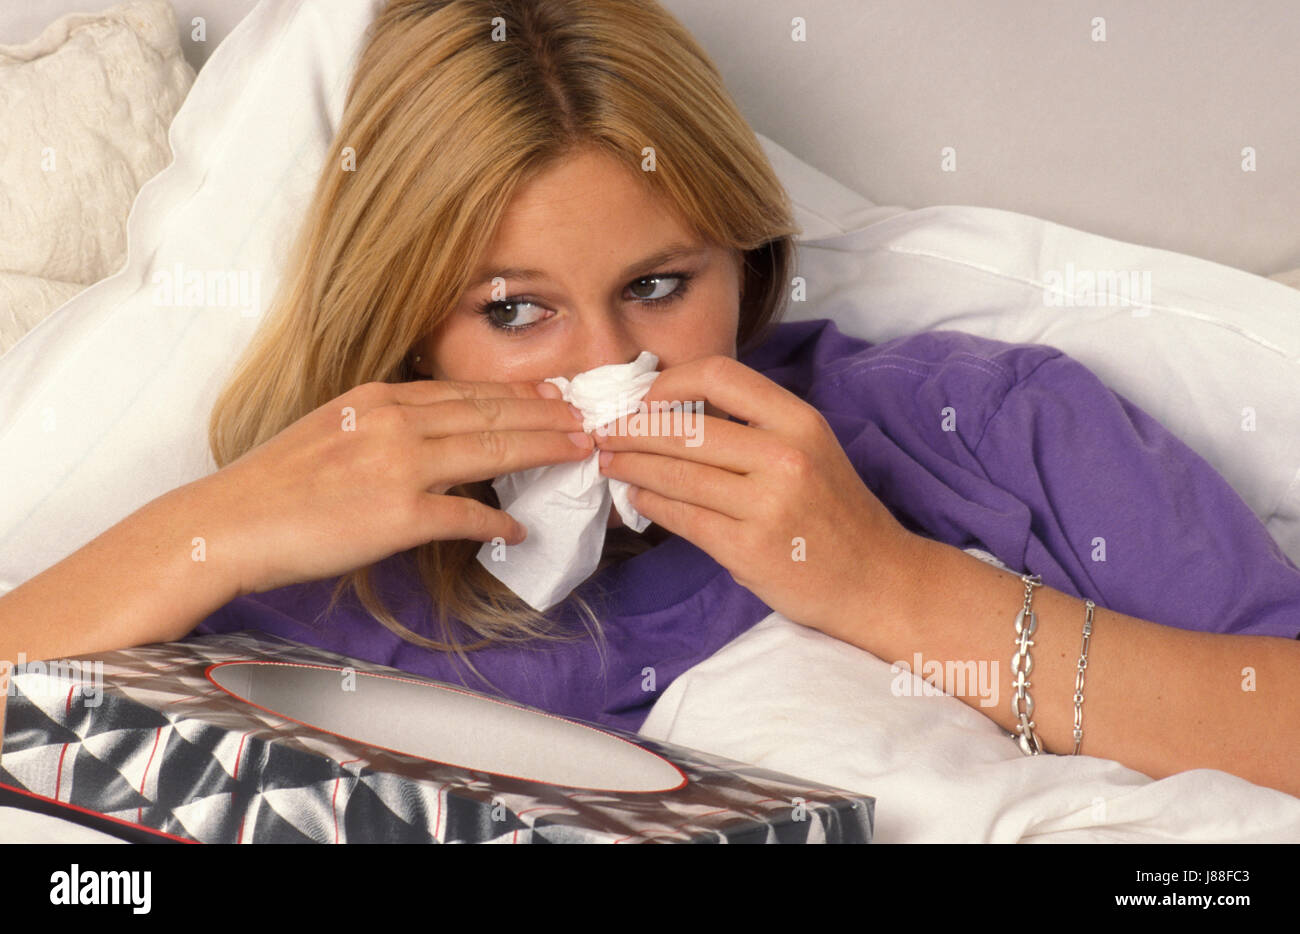 young woman in bed blowing her nose on tissue Stock Photo